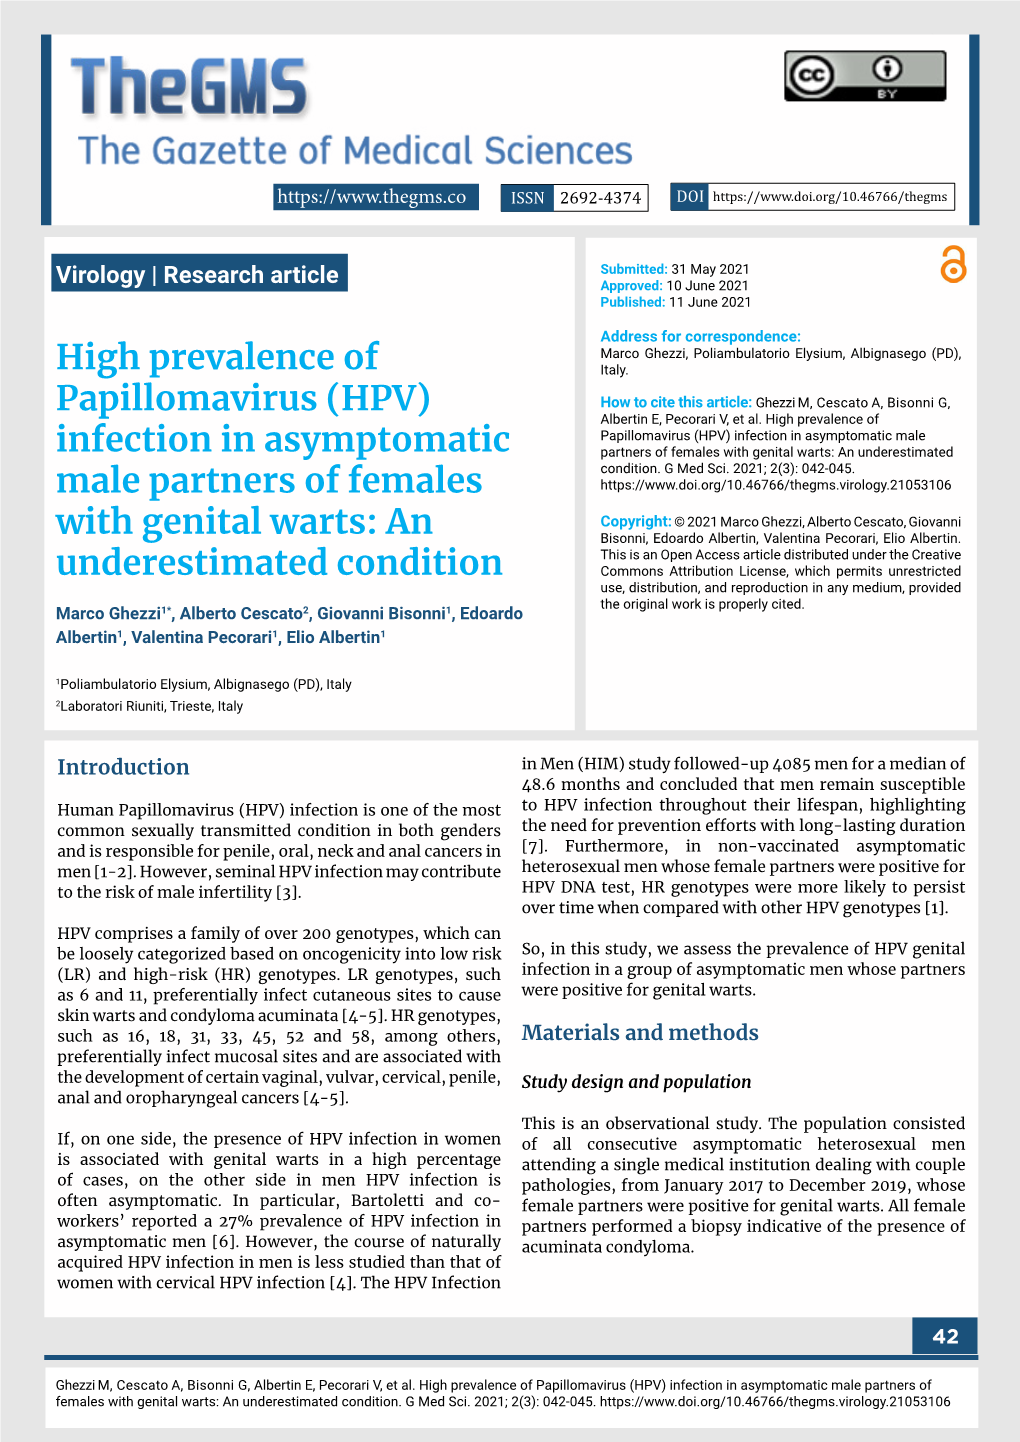 (HPV) Infection in Asymptomatic Male Partners of Females with Genital Warts: an Underestimated Condition